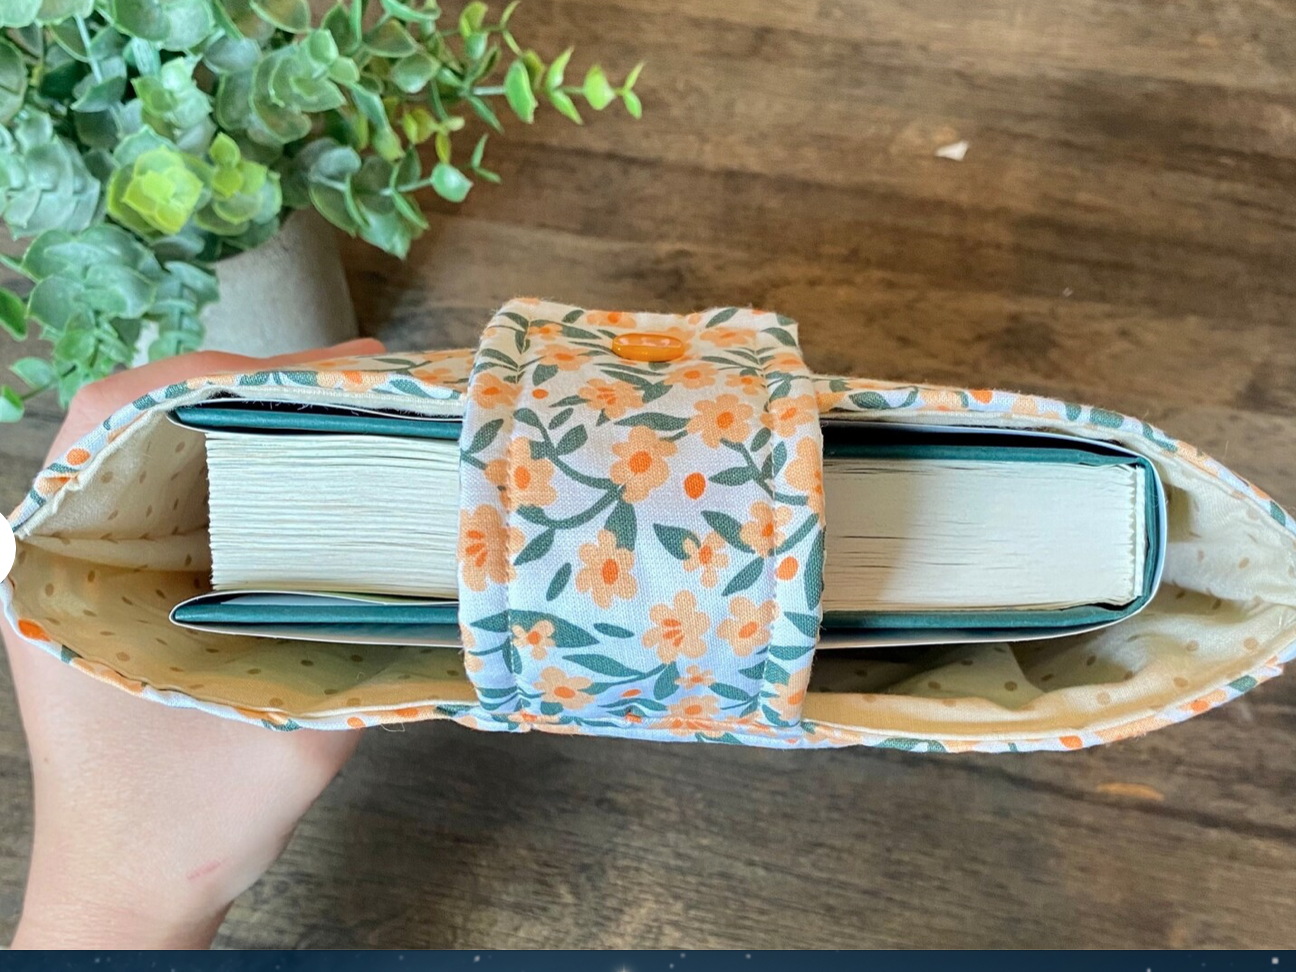 Floral fabric book sleeve containing book